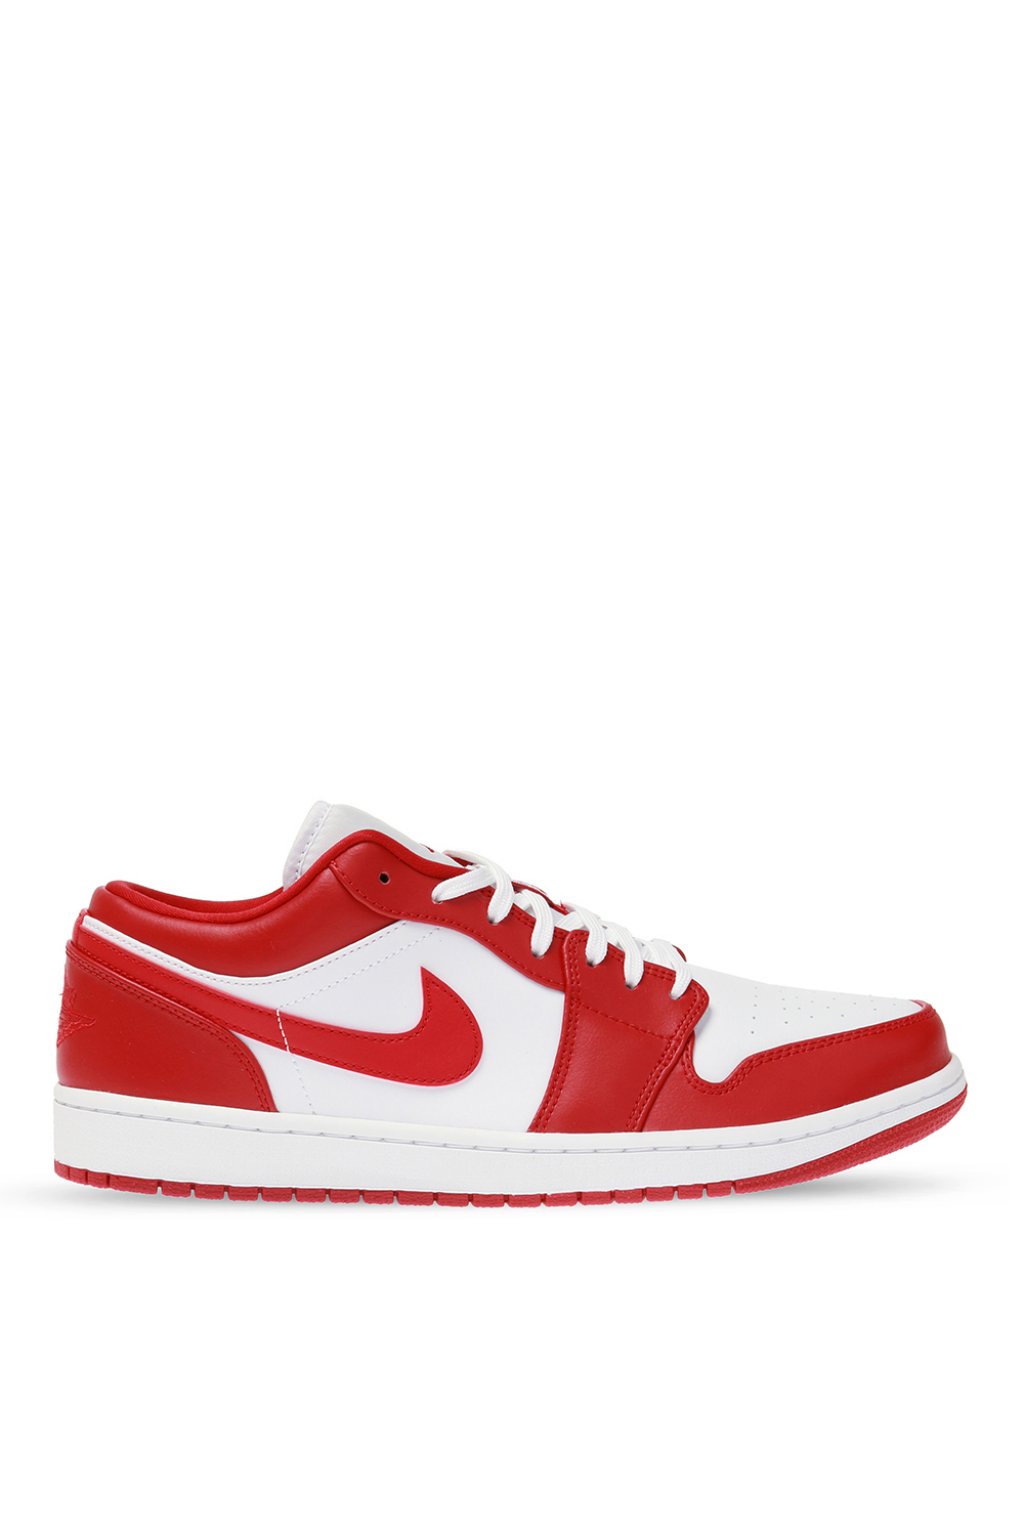 red and white nike low tops